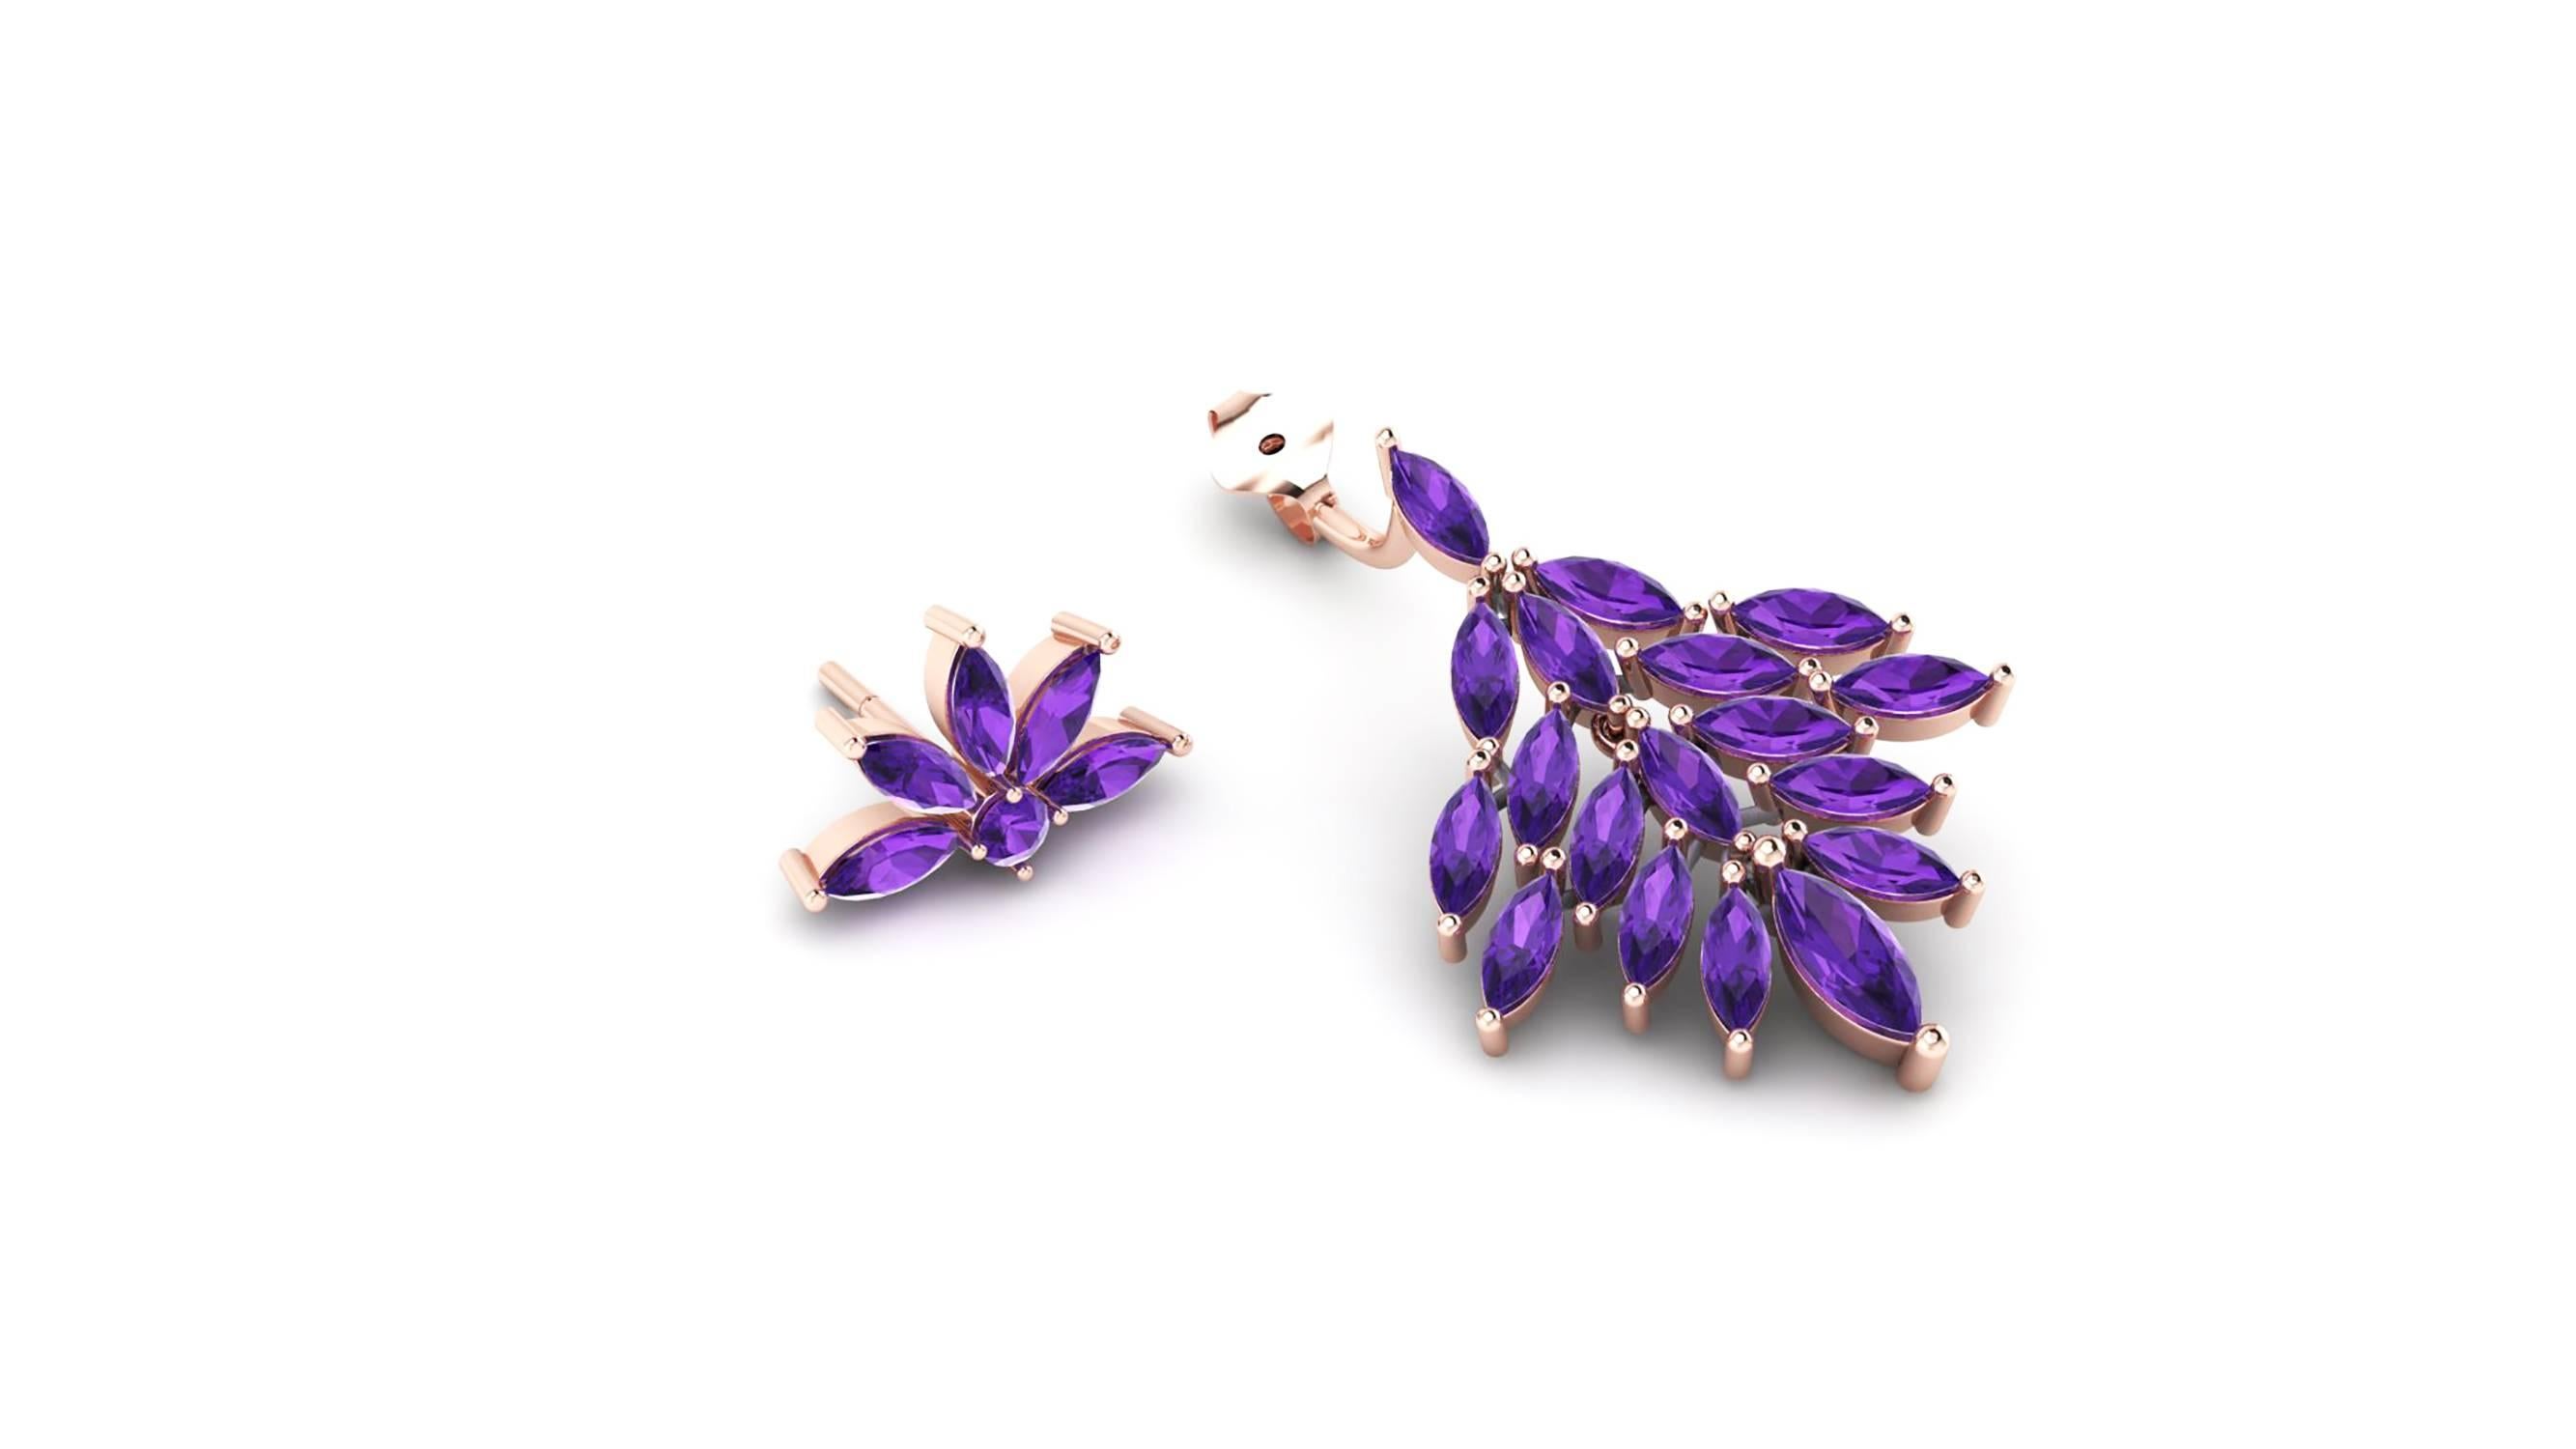 Ferrucci Marquise shape cut Amethyst dangling earrings, made in 18k rose gold by Italian master jeweler Francesco Ferrucci in New York.

Exquisite combination of a classic style with a modern wear for a distinguished younger style.

